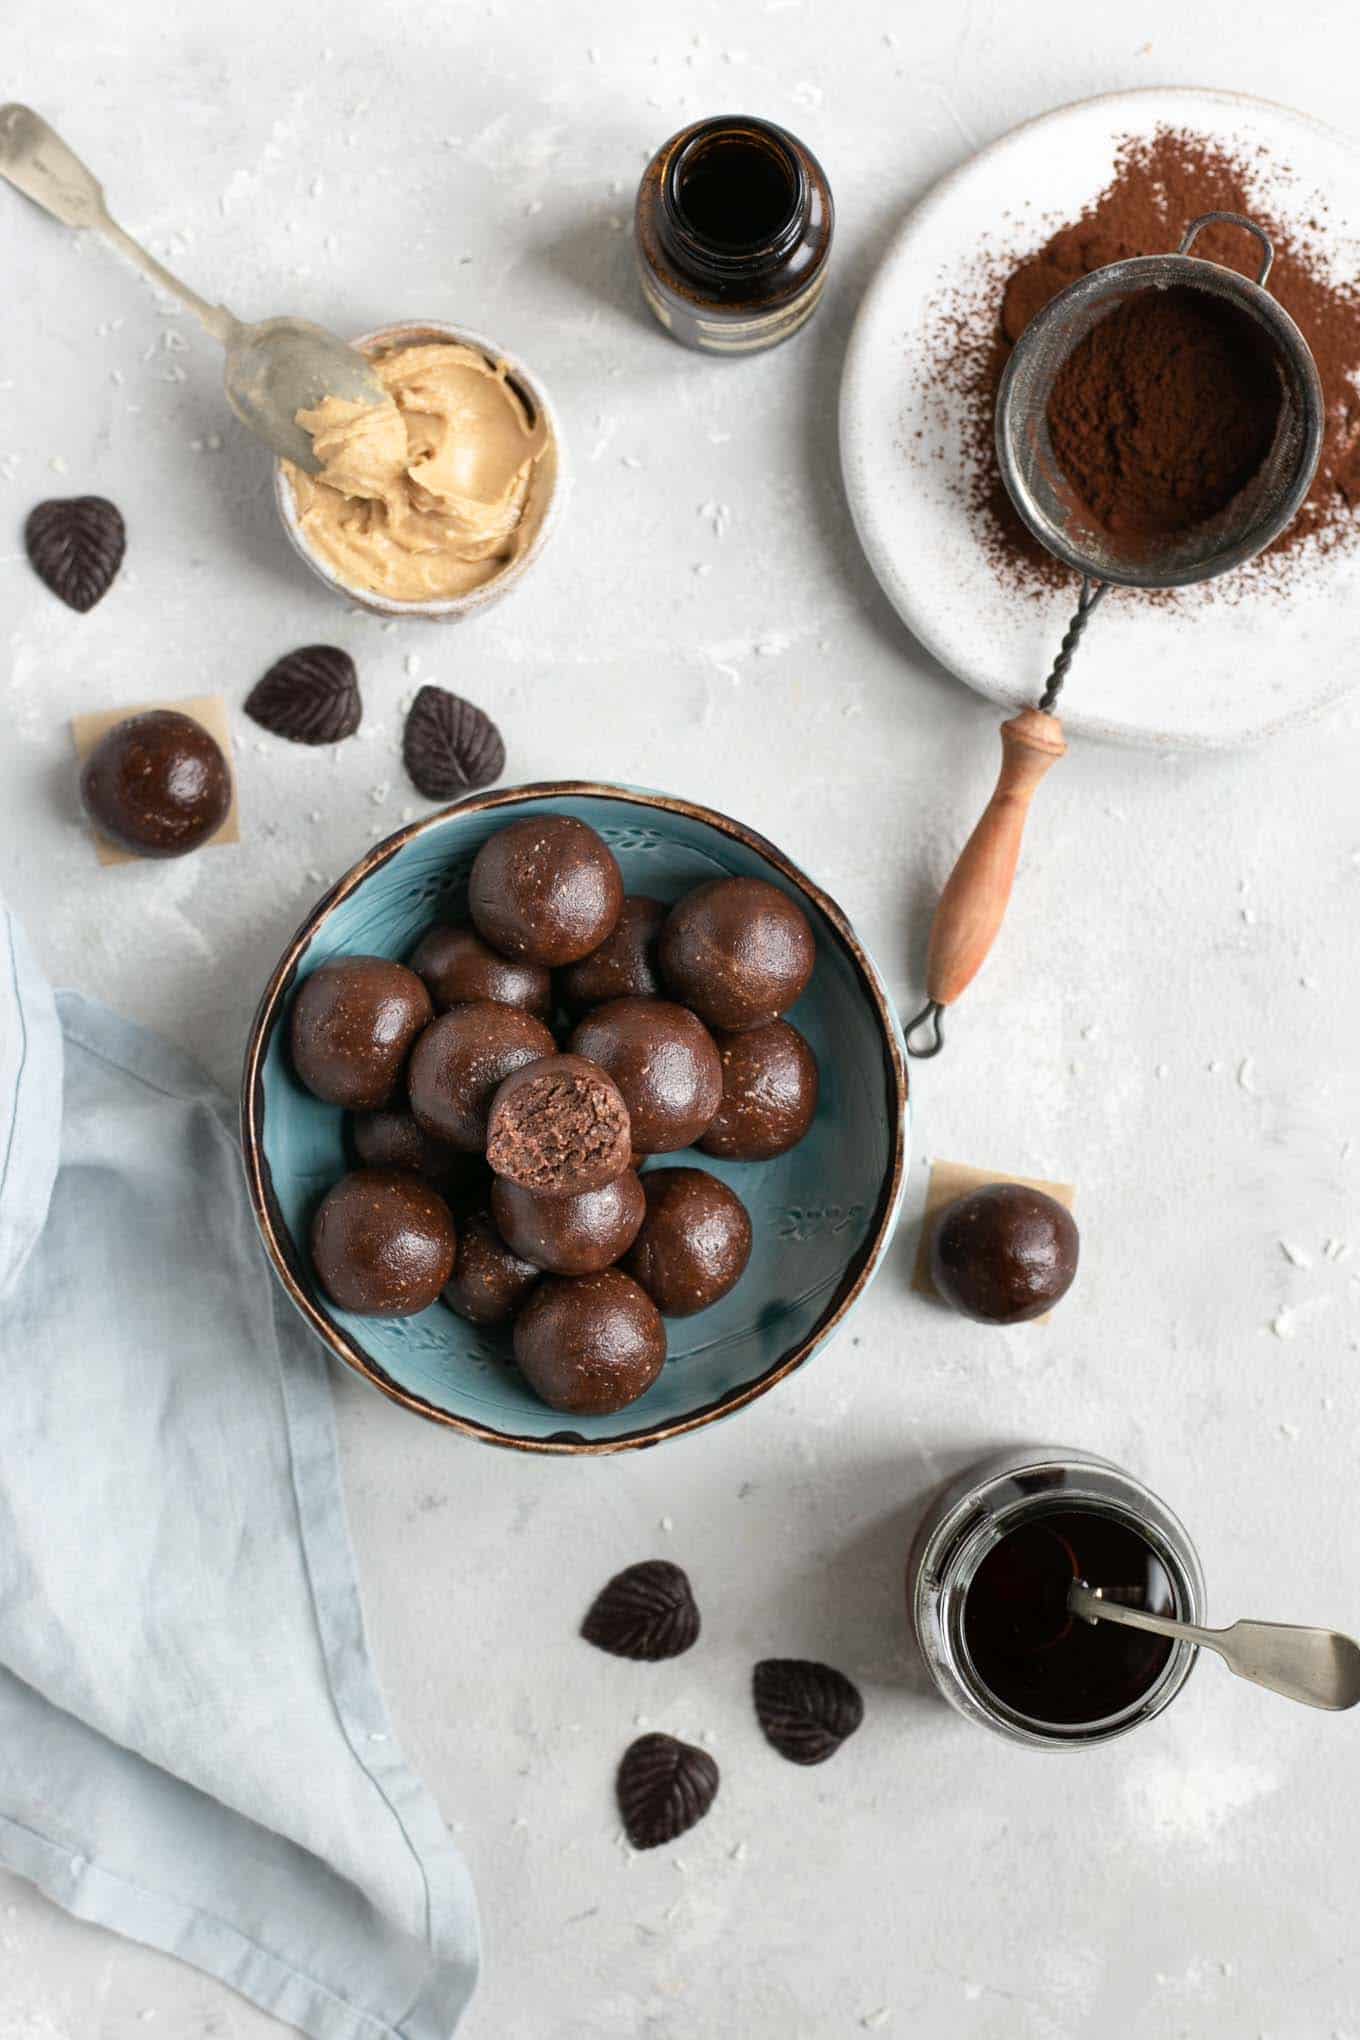 Protein packed chocolate peanut butter energy bites! Healthy snack made with only handful of ingredients! #glutenfree #vegansnack #dairyfree | via @annabanana.co